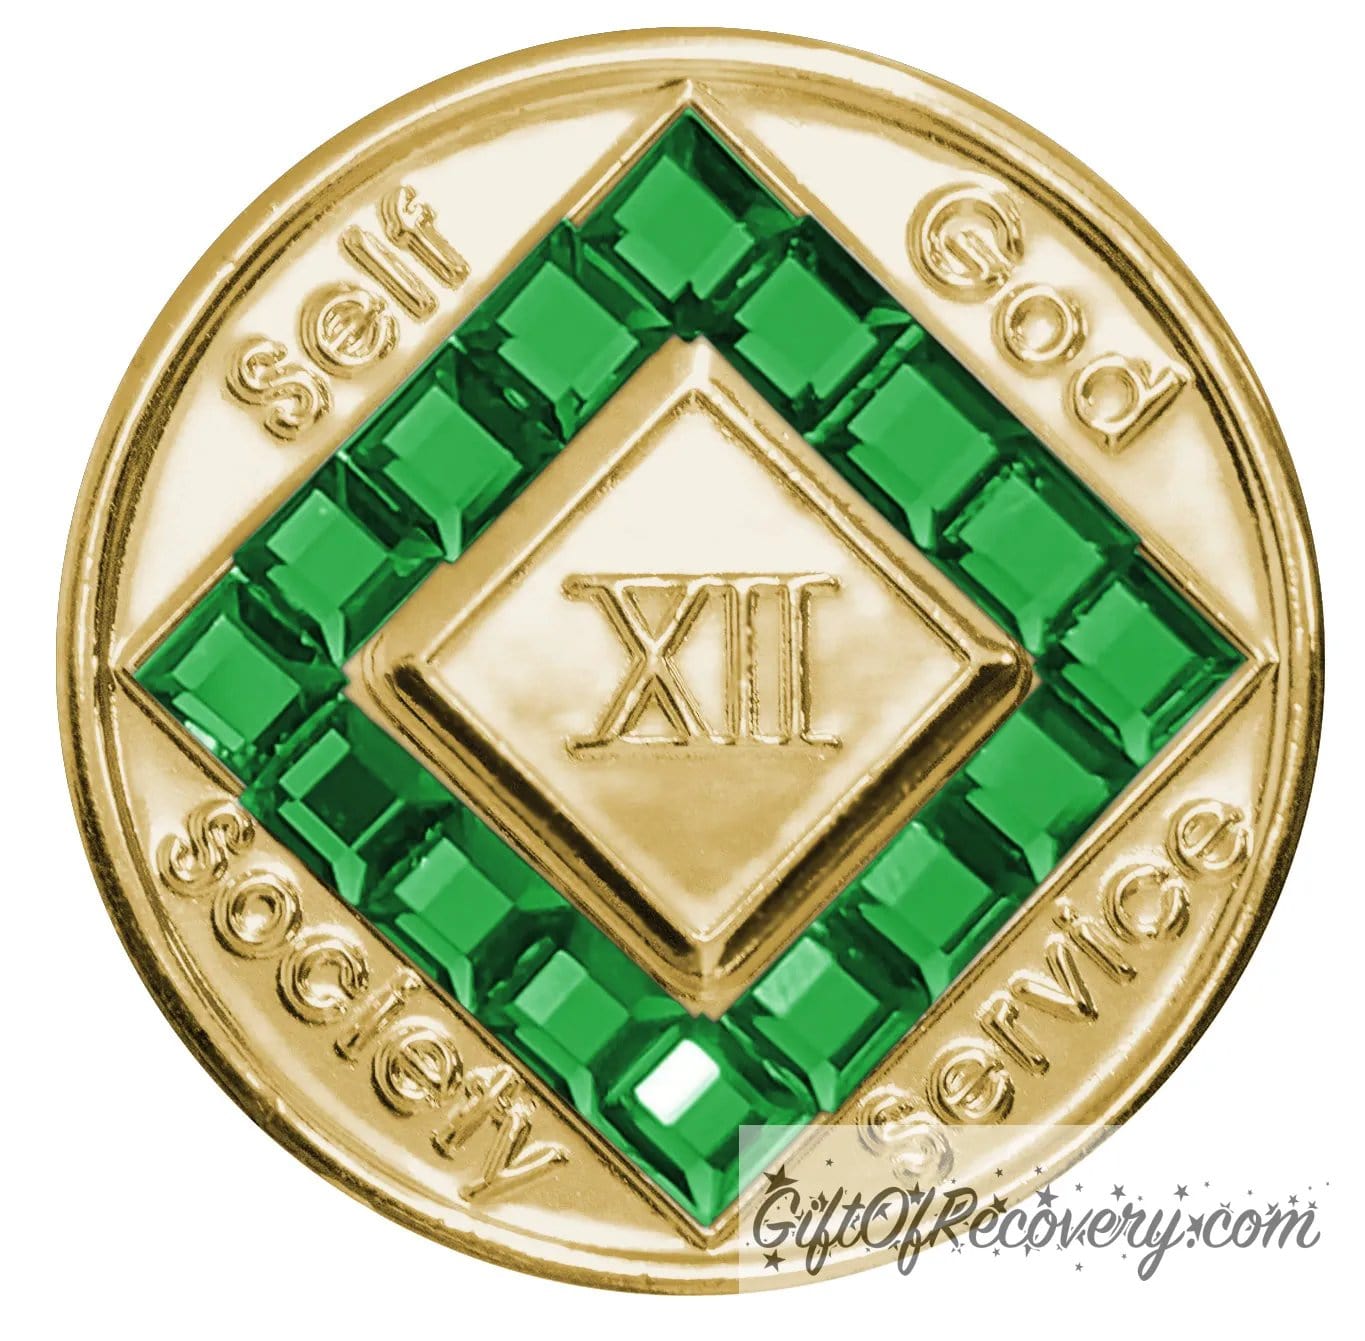 Clean Time Chip Narcotics Anonymous Gold with Diamond Shaped Crystal (Emerald)